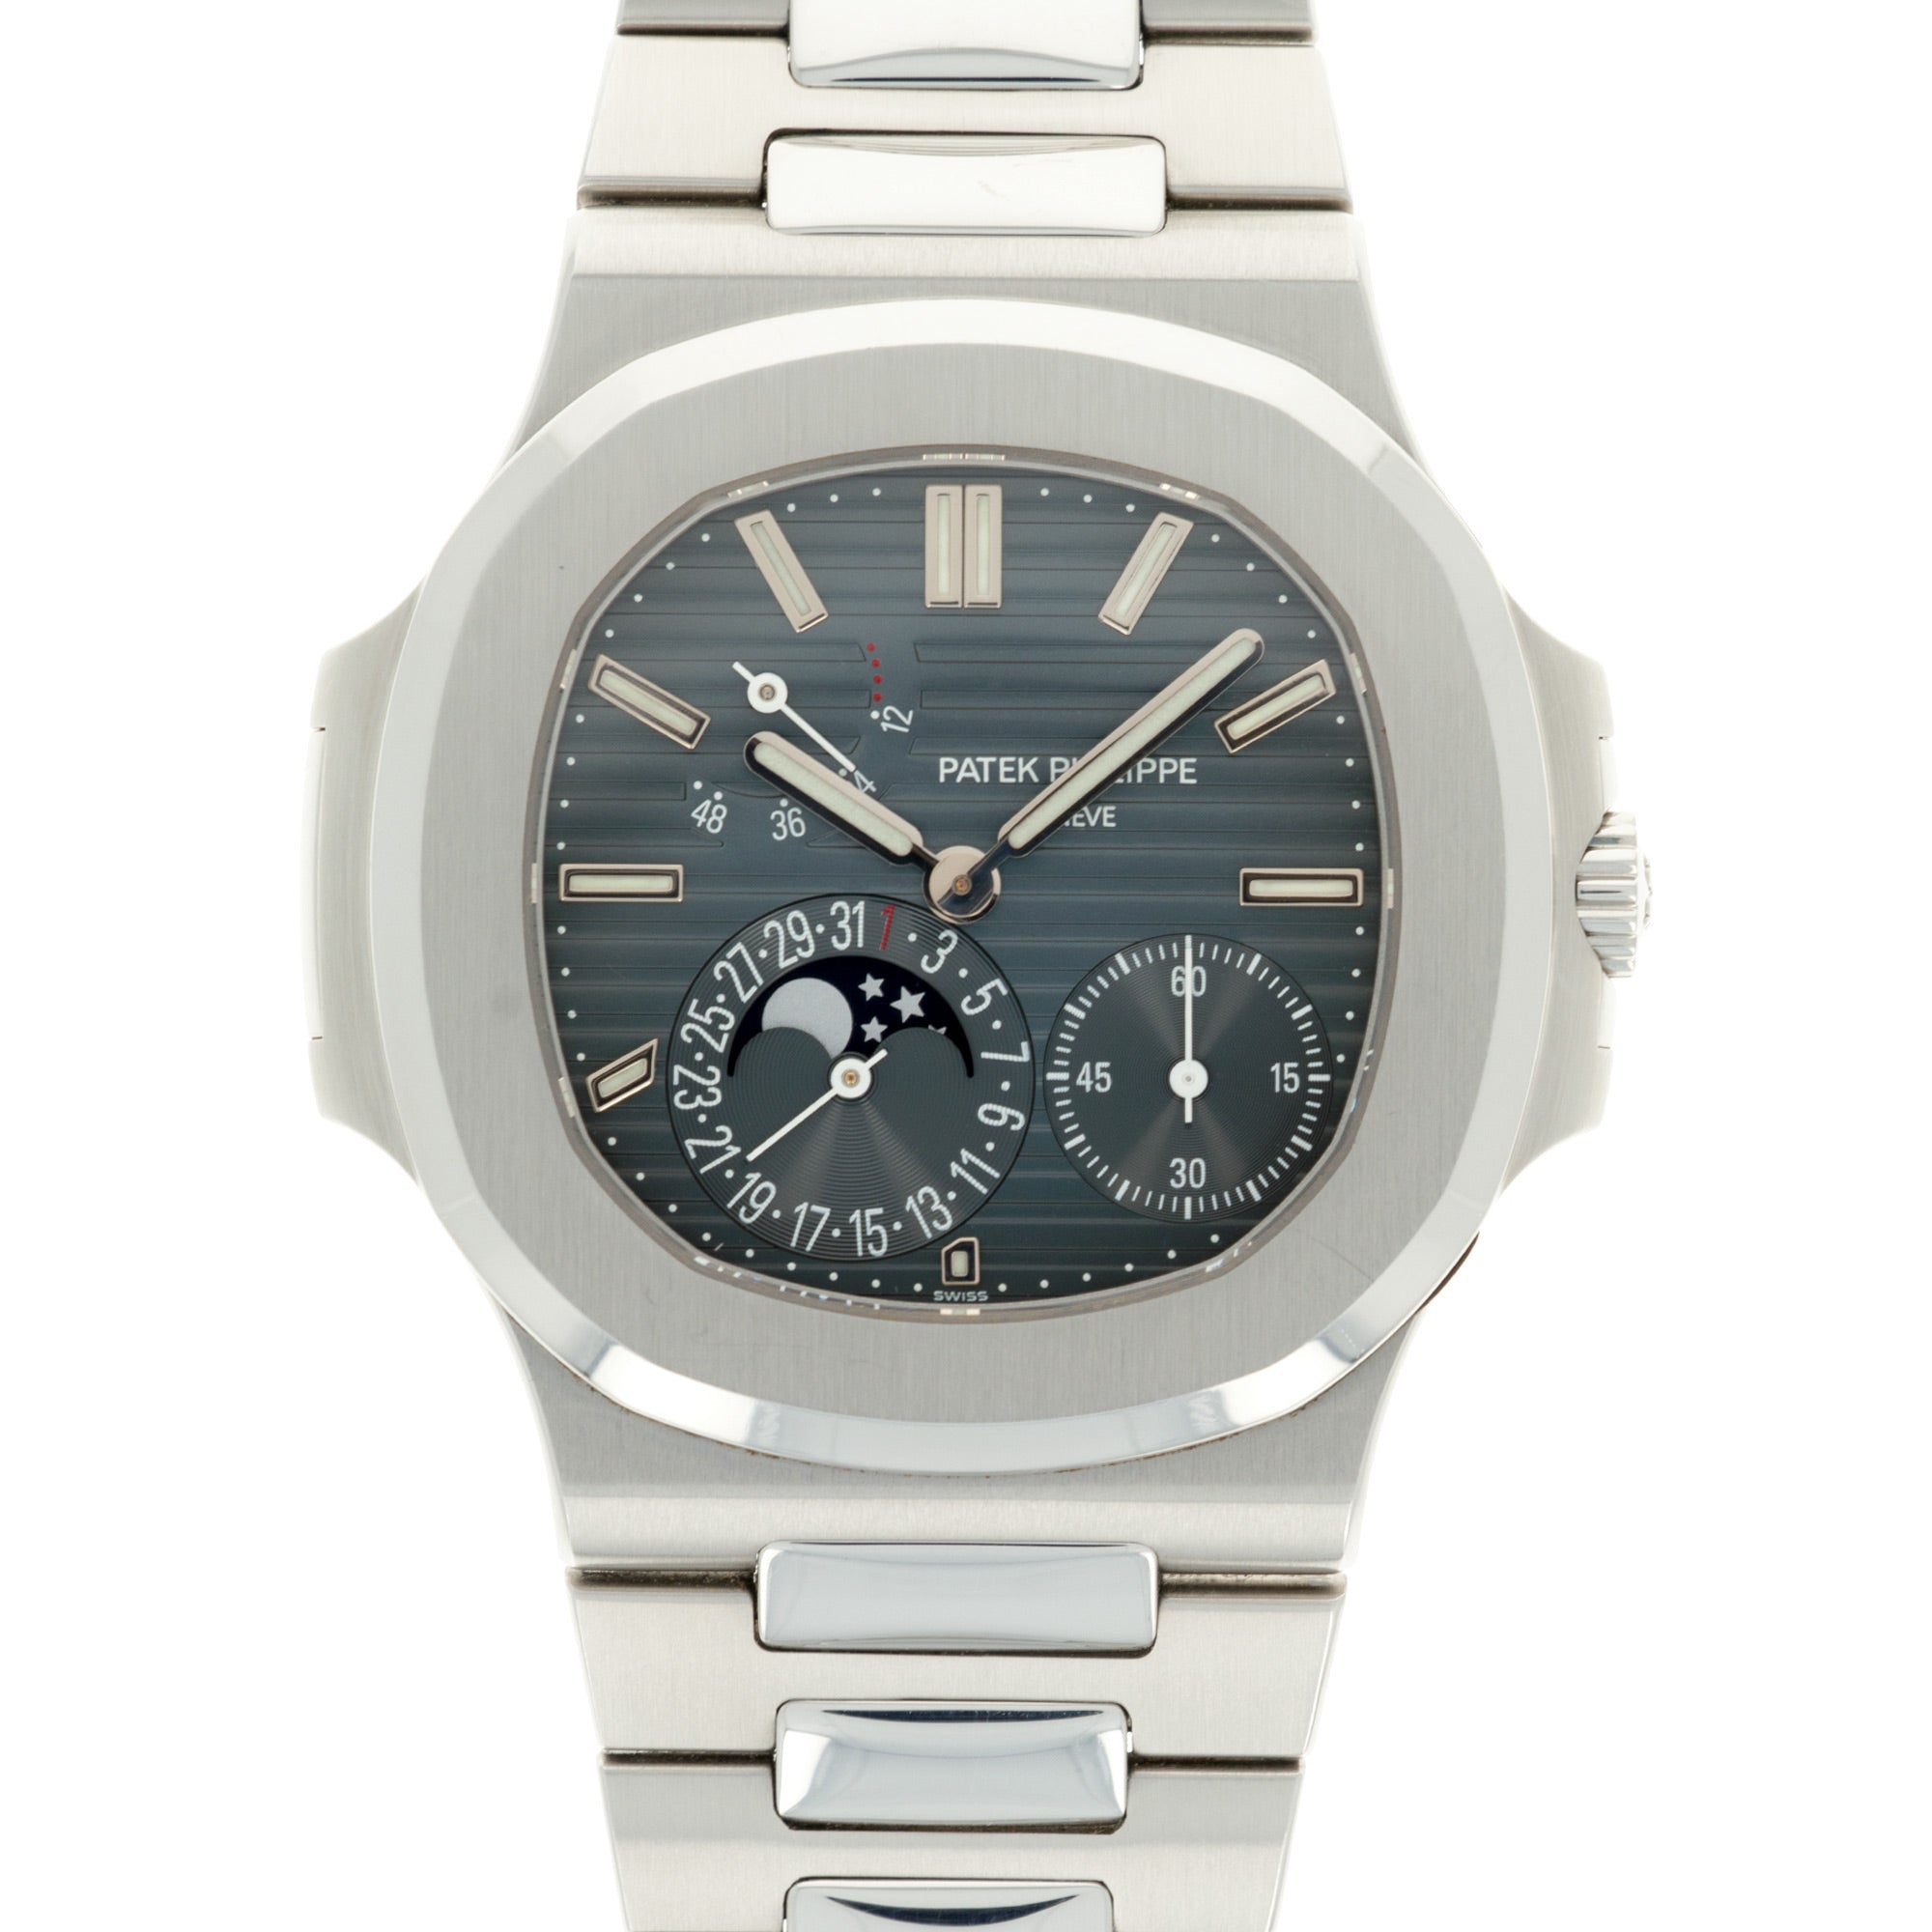 Patek Philippe - Patek Philippe Nautilus Moonphase Watch Ref. 5712 with Original Box and Papers - The Keystone Watches